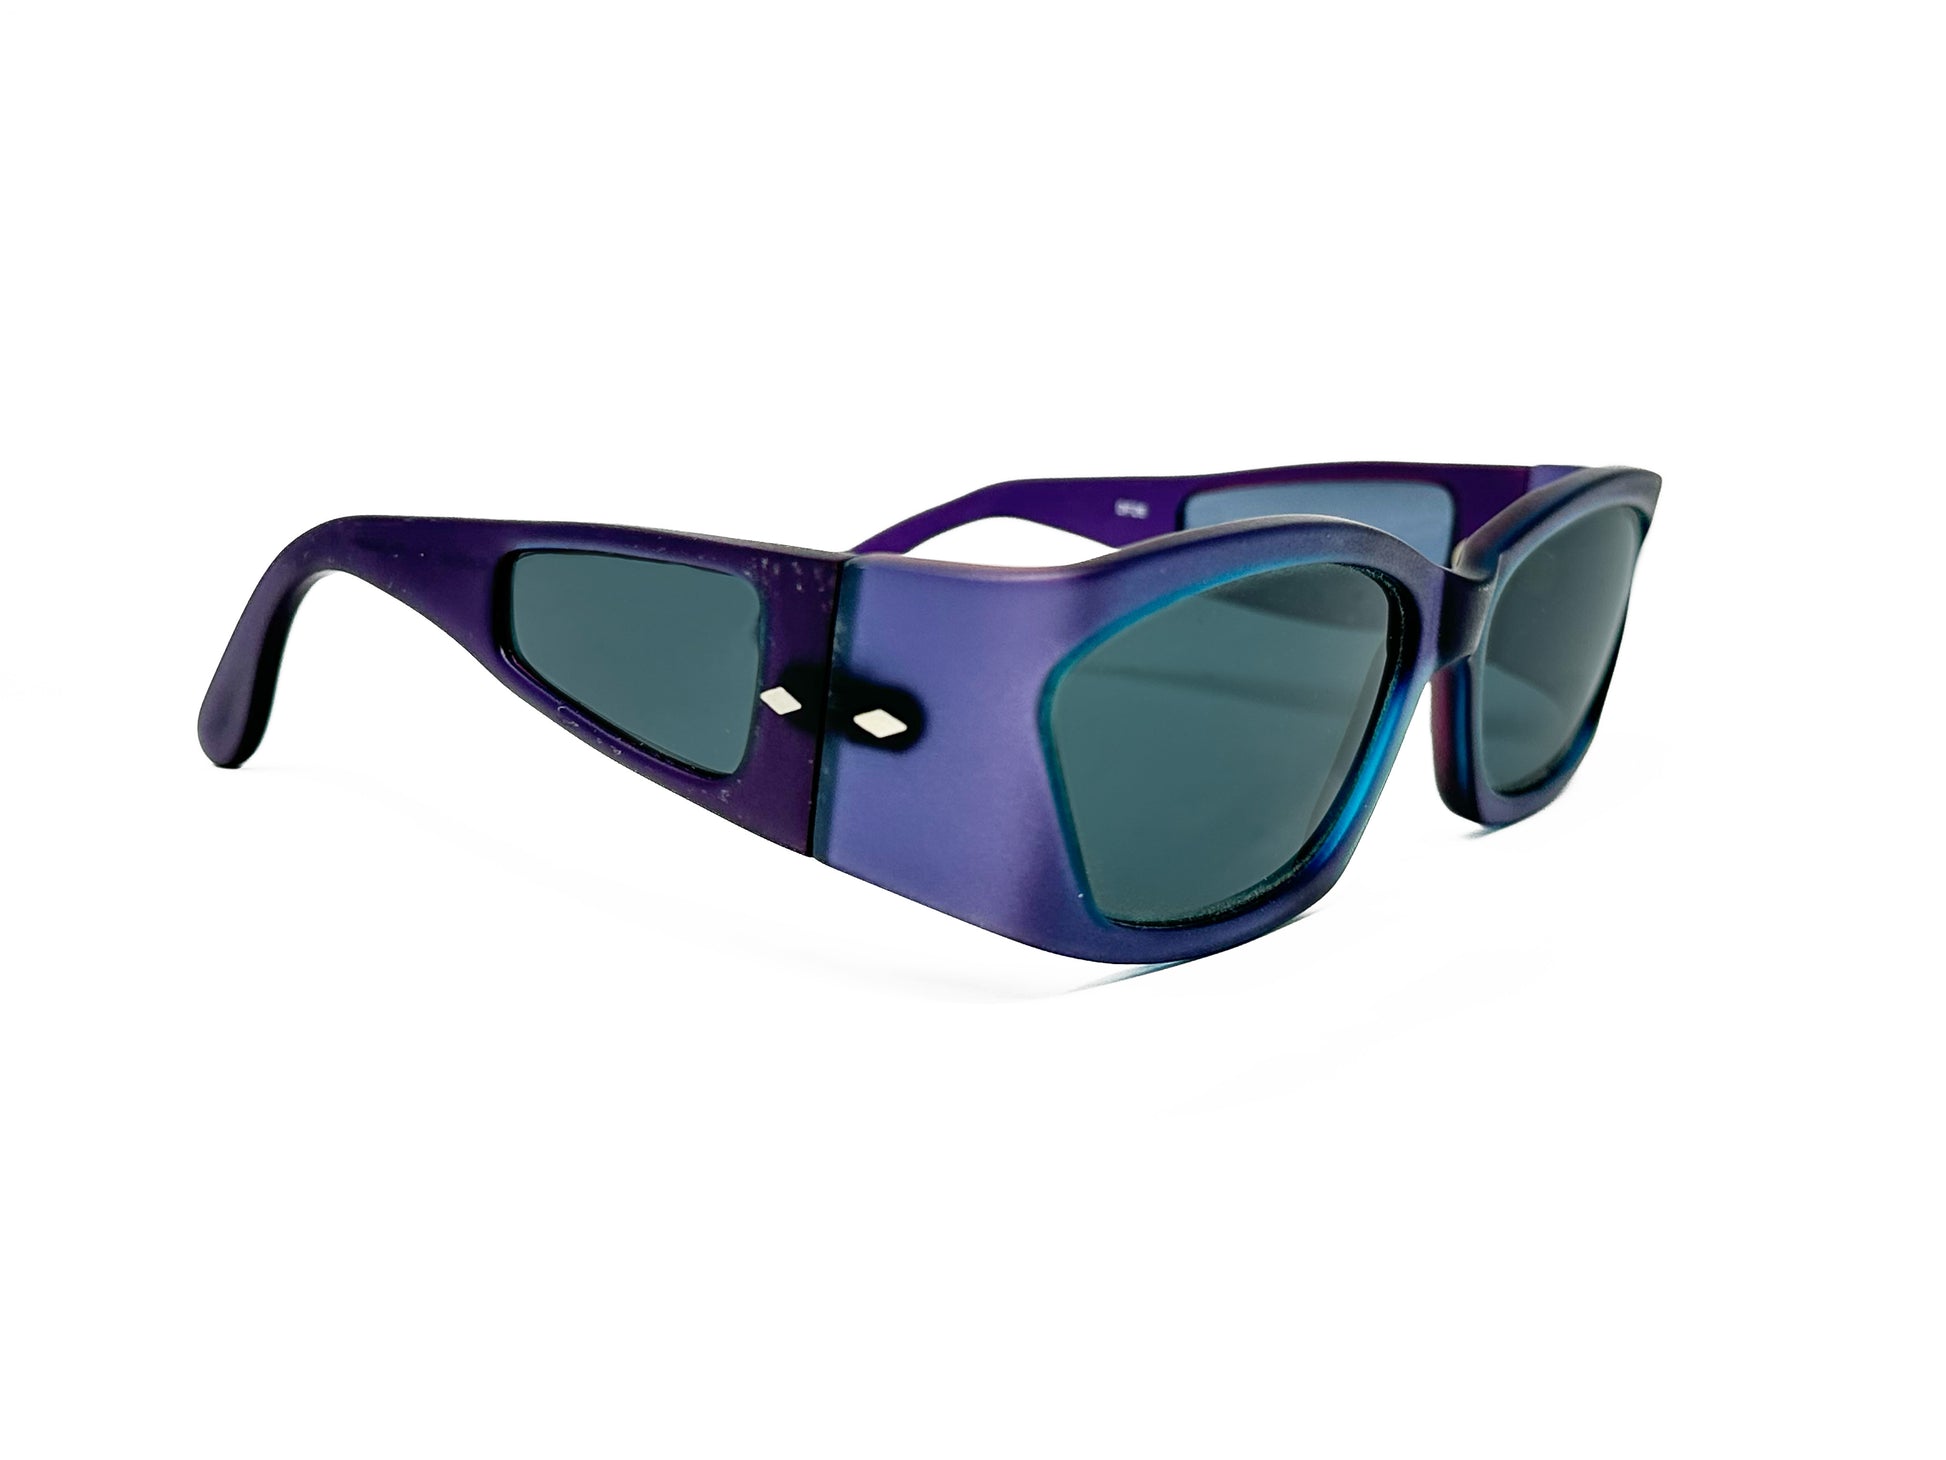 Kador rectangular, acetate sunglasses with cat-eye shaped lens. Model: DF26. Color: M/DBA363 - Purple with blue lenses. Side view.